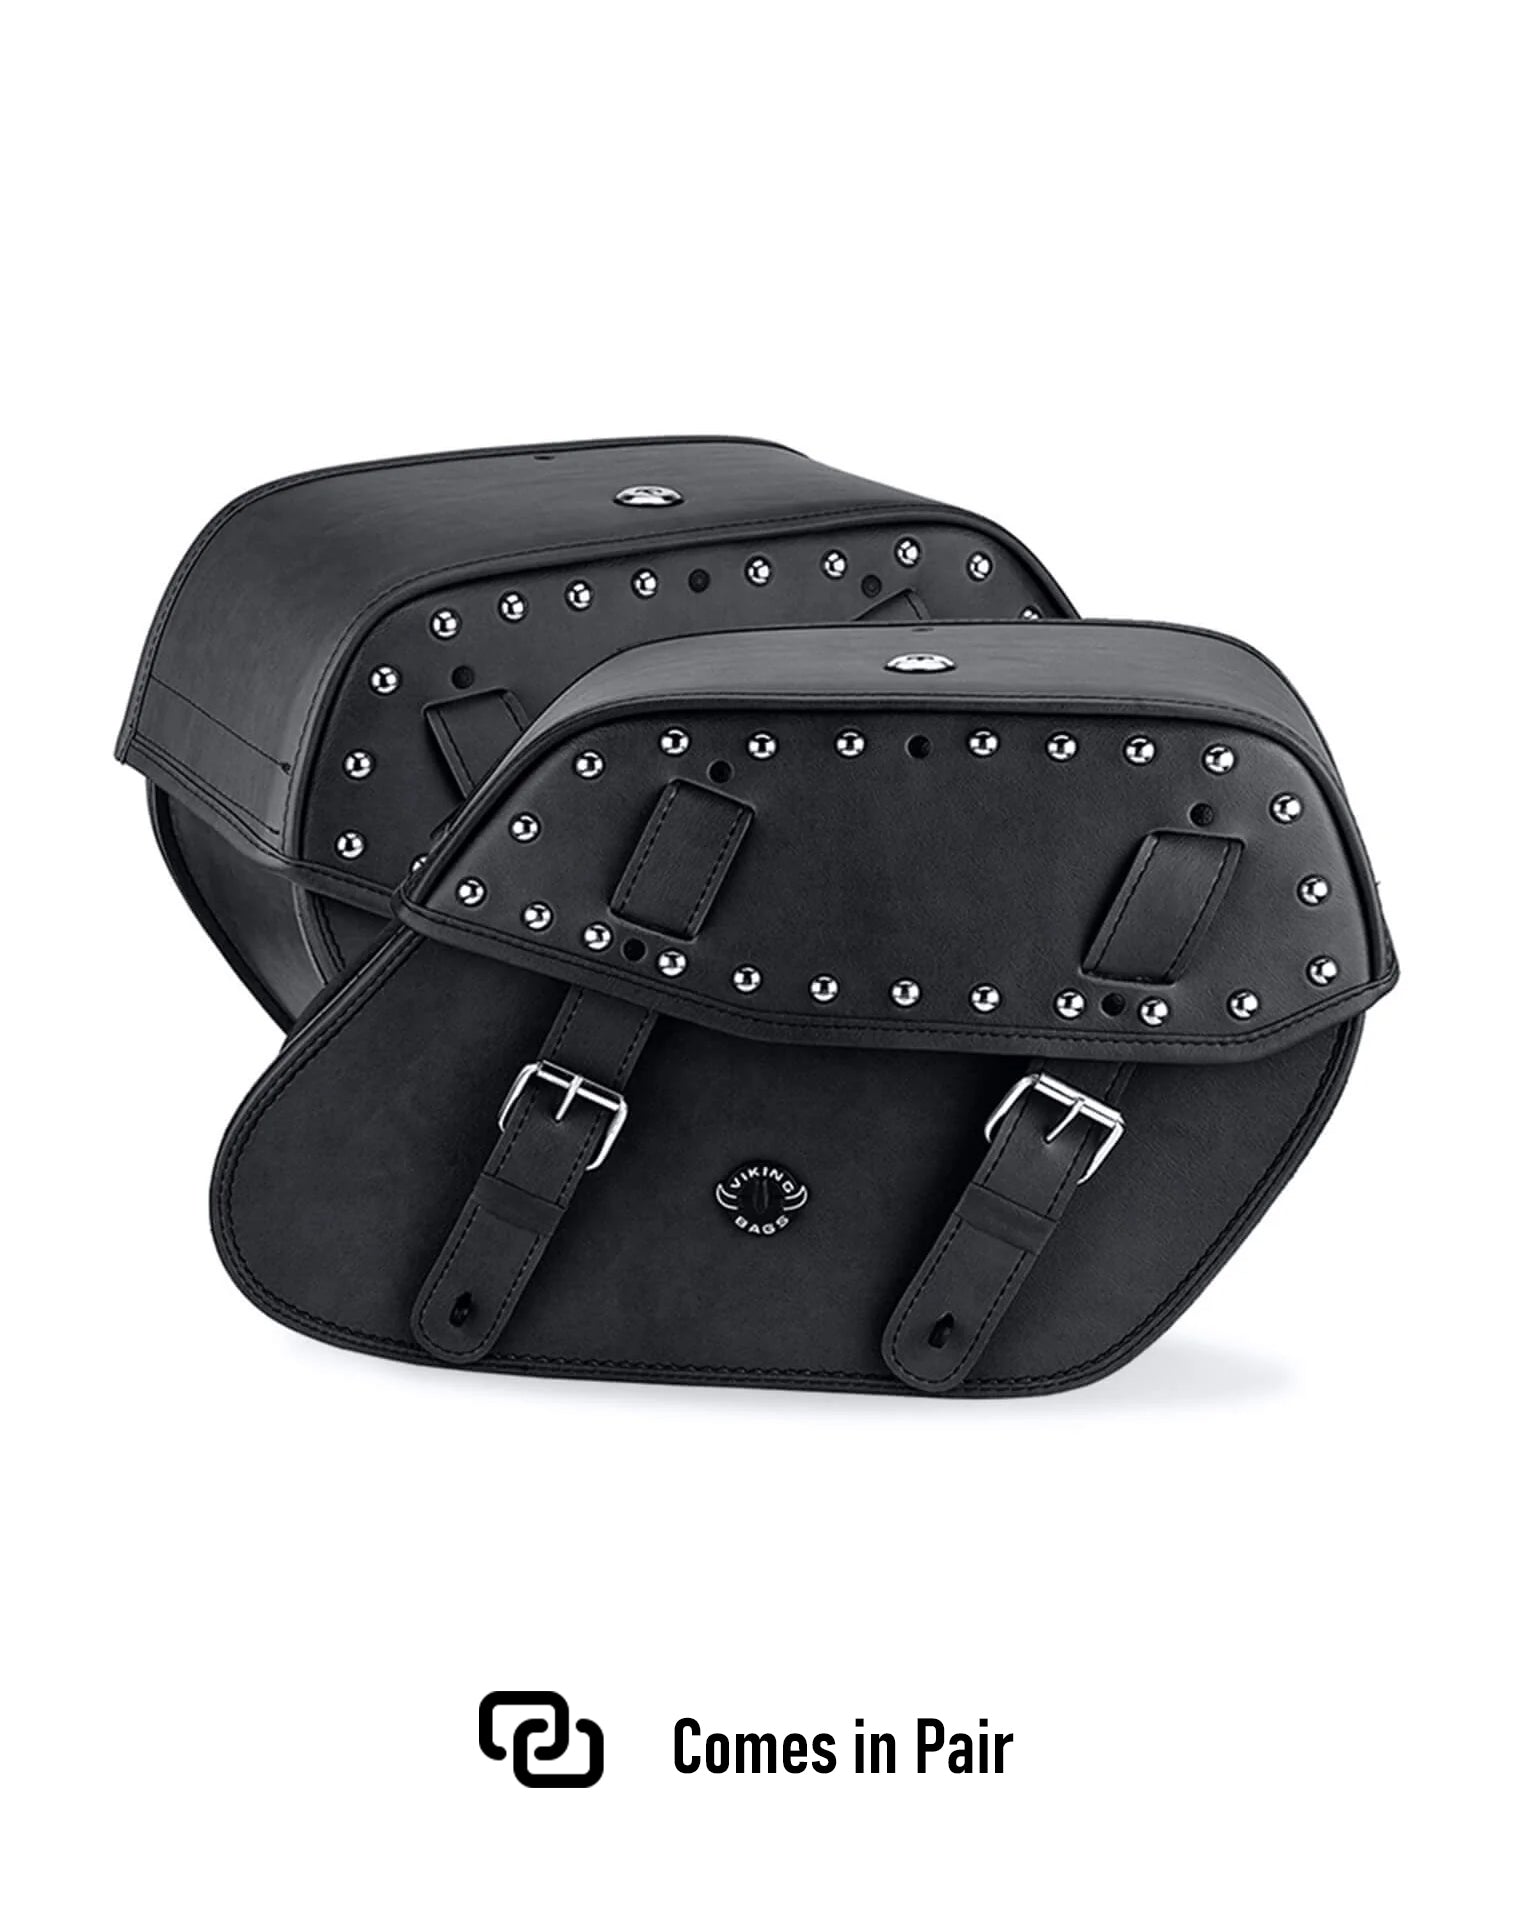 Viking Odin Large Victory Gunner Studded Leather Motorcycle Saddlebags Weather Resistant Bags Comes in Pair